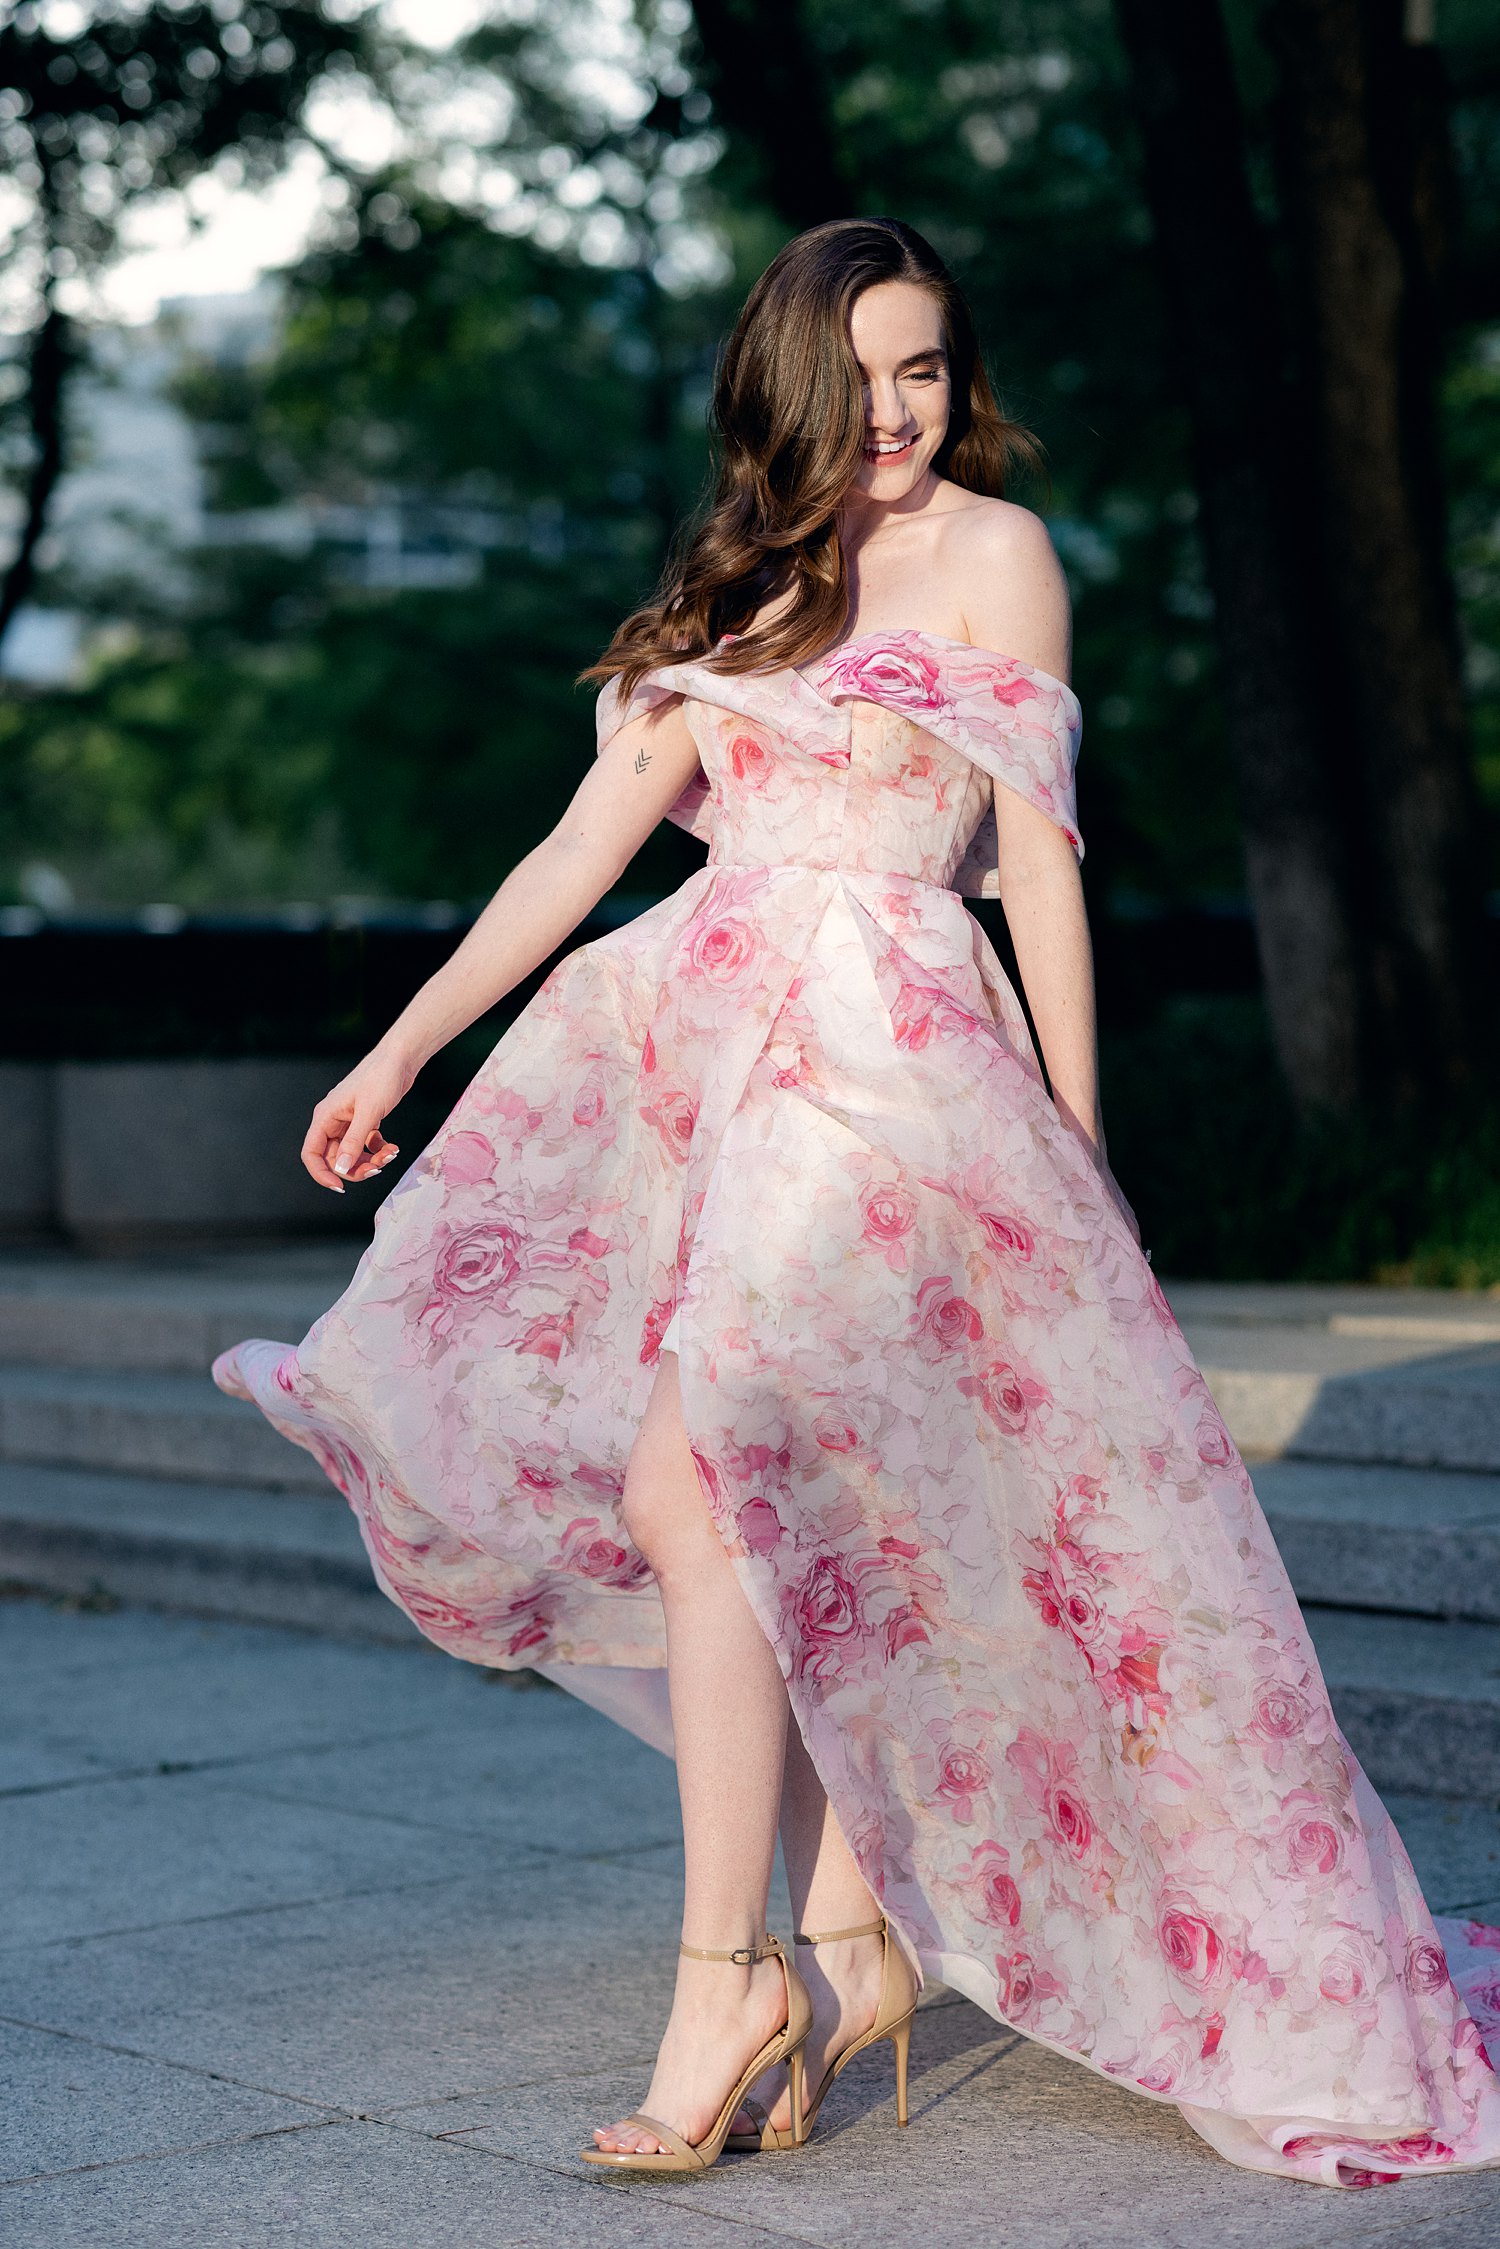 smiling woman in Pink floral gown dancing